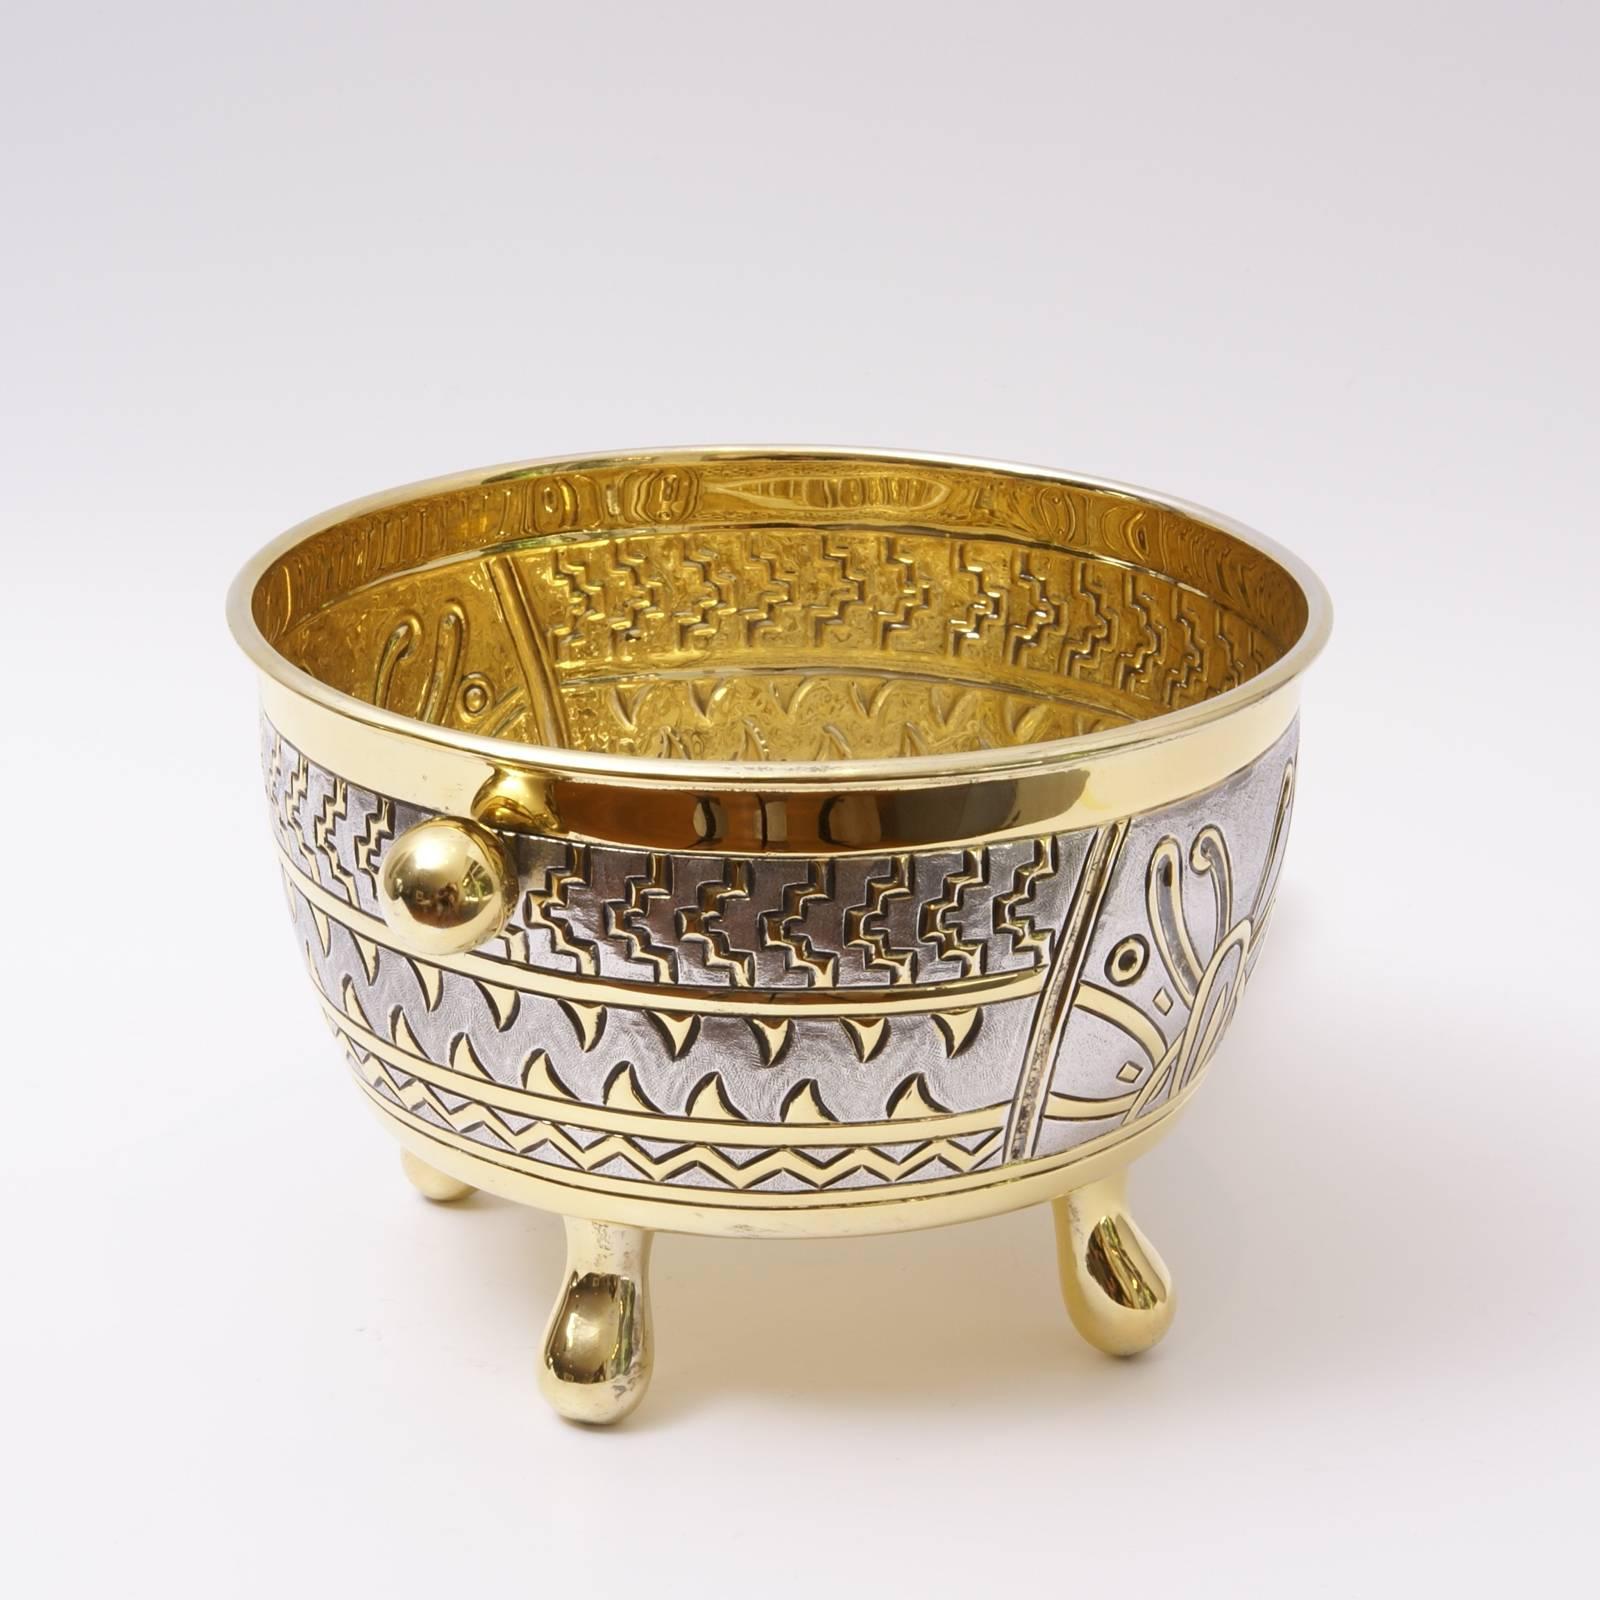 Gilt and engraved sterling silver bowl made by Tane ( Mexico ) in precolumbian style